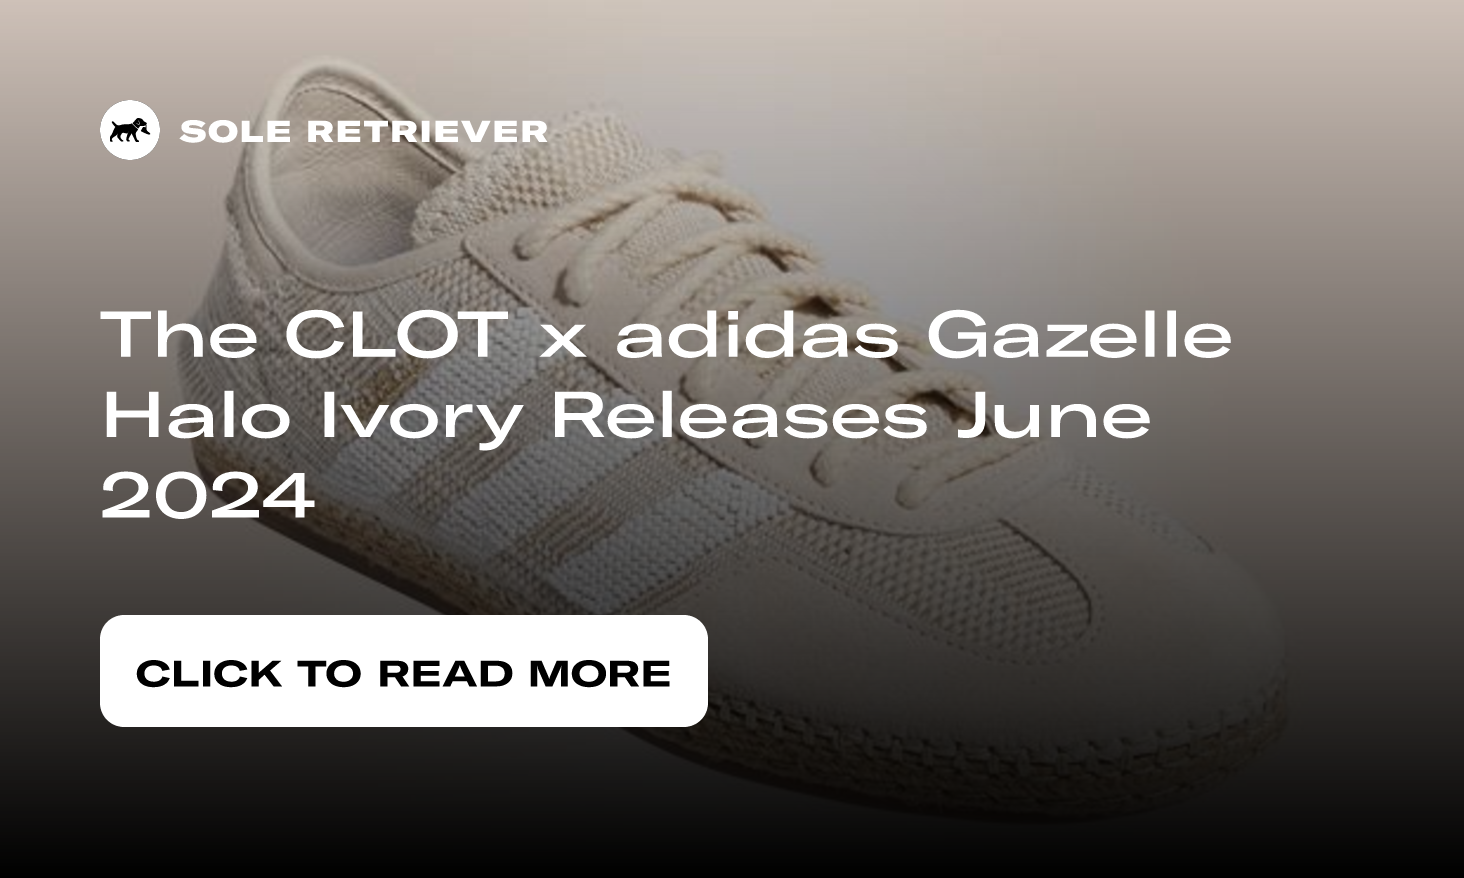 The CLOT x adidas Gazelle Halo Ivory Releases June 2024